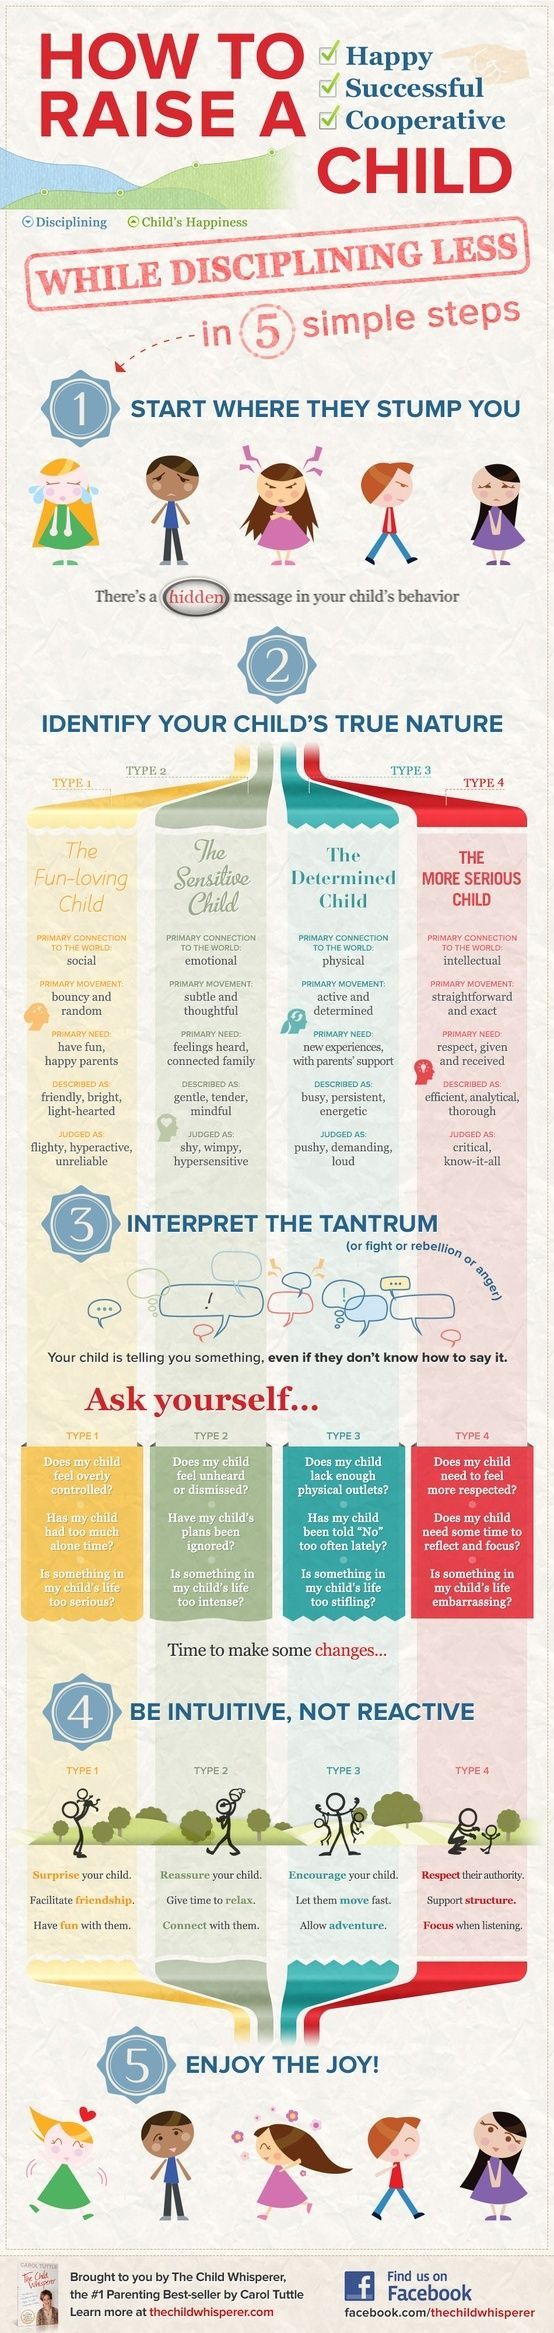 Parenting different types of children. Some good tips here.